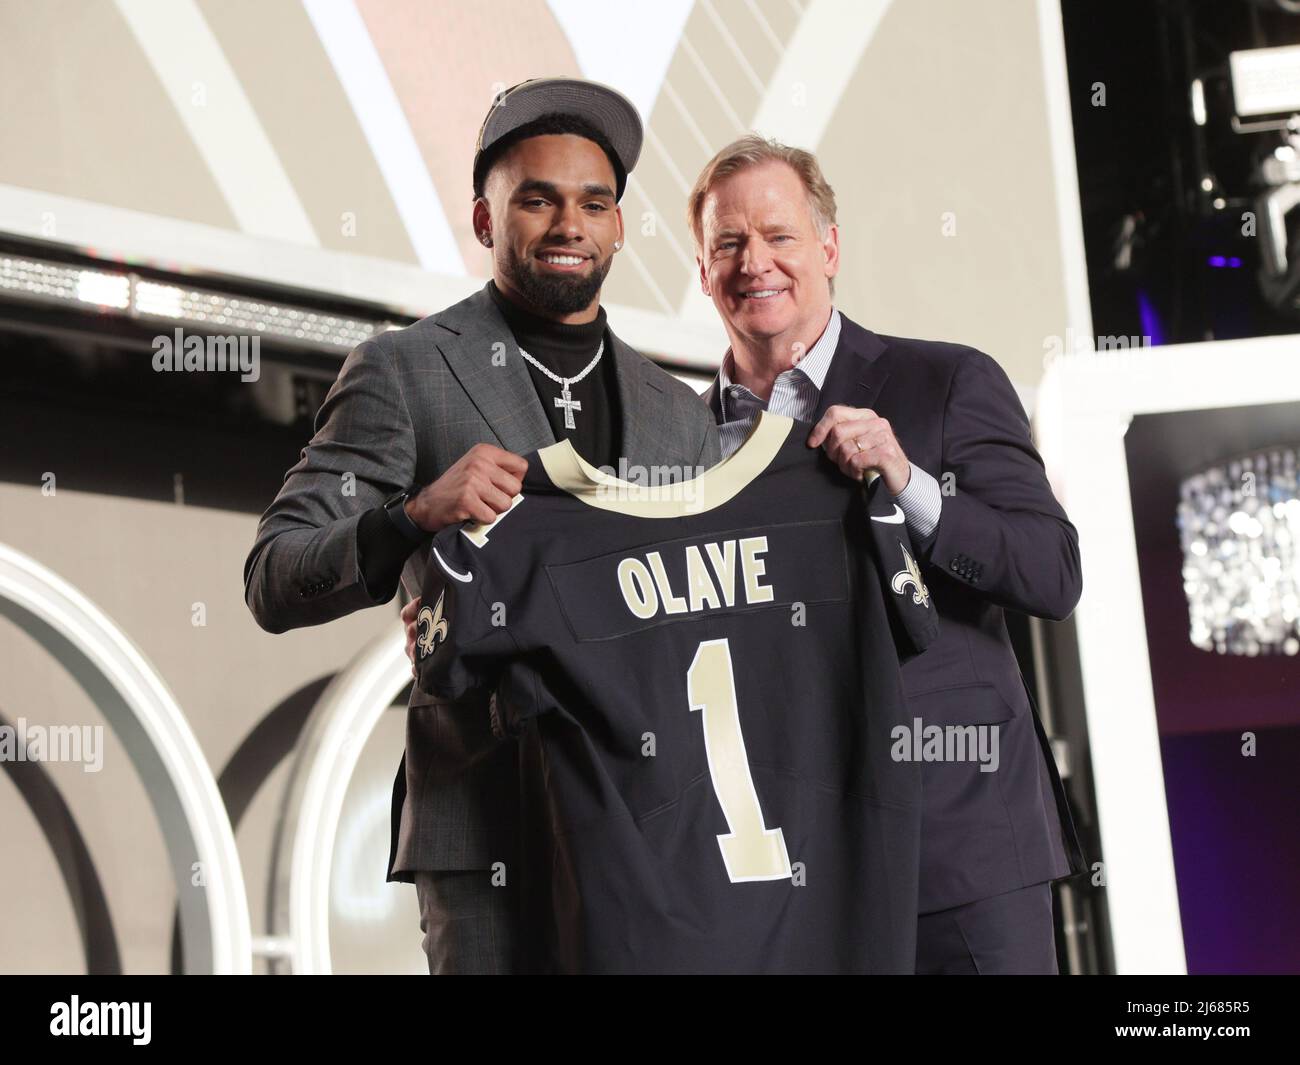 Chris Olave taken No. 11 overall by New Orleans Saints in NFL draft